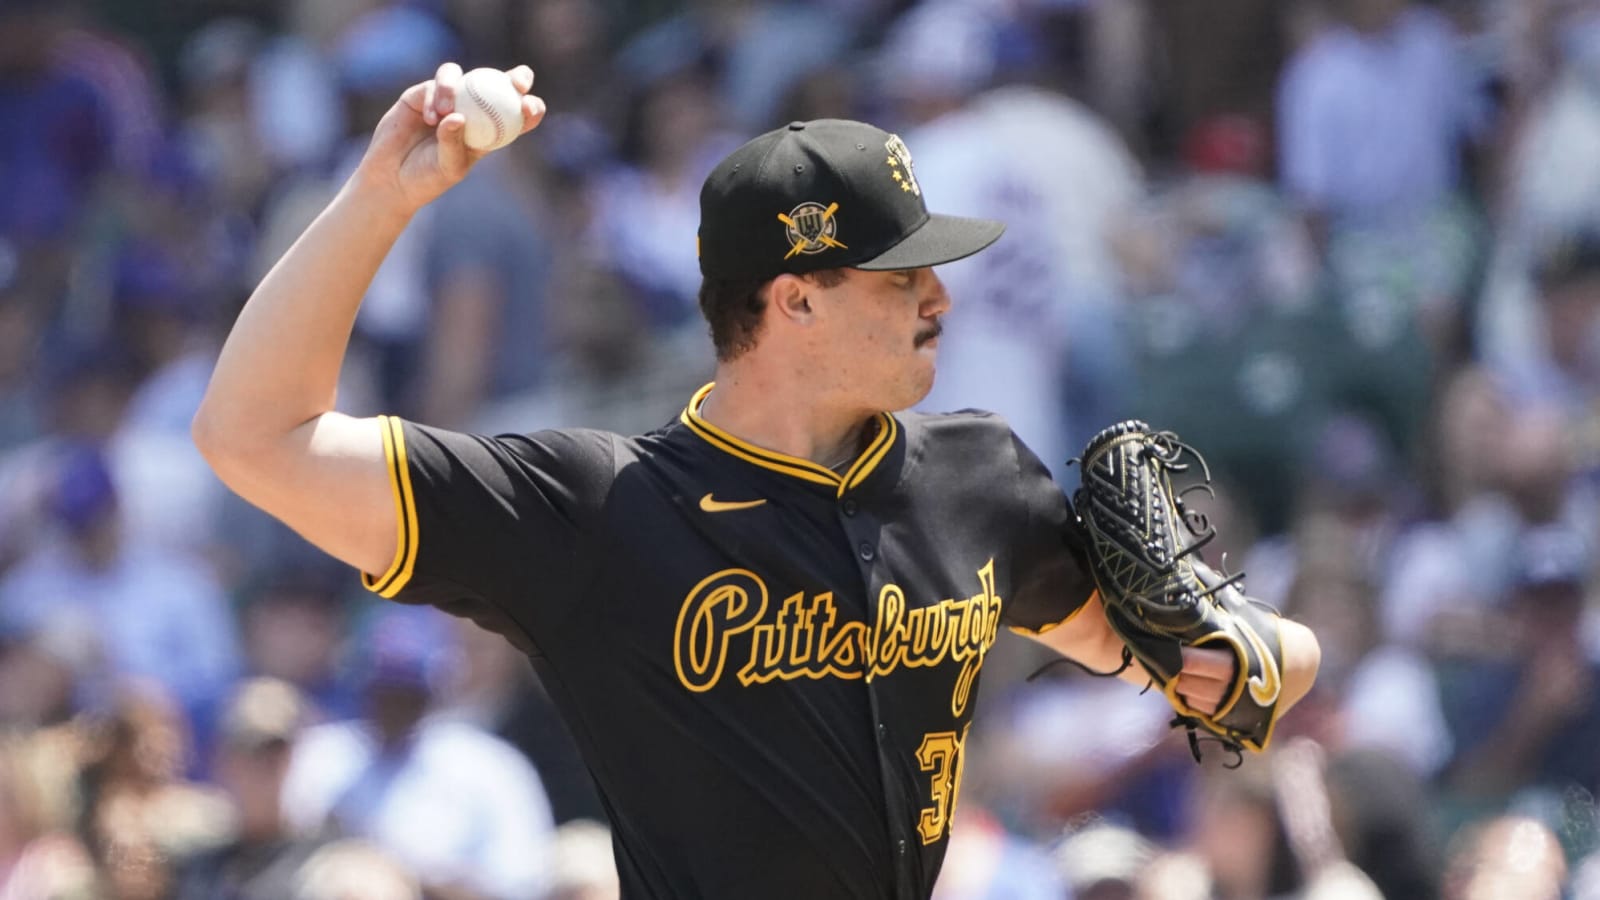 Top 10 Pirates Prospects Update: Skenes Sizzles for 1st Win, Ashcraft Turns Corner